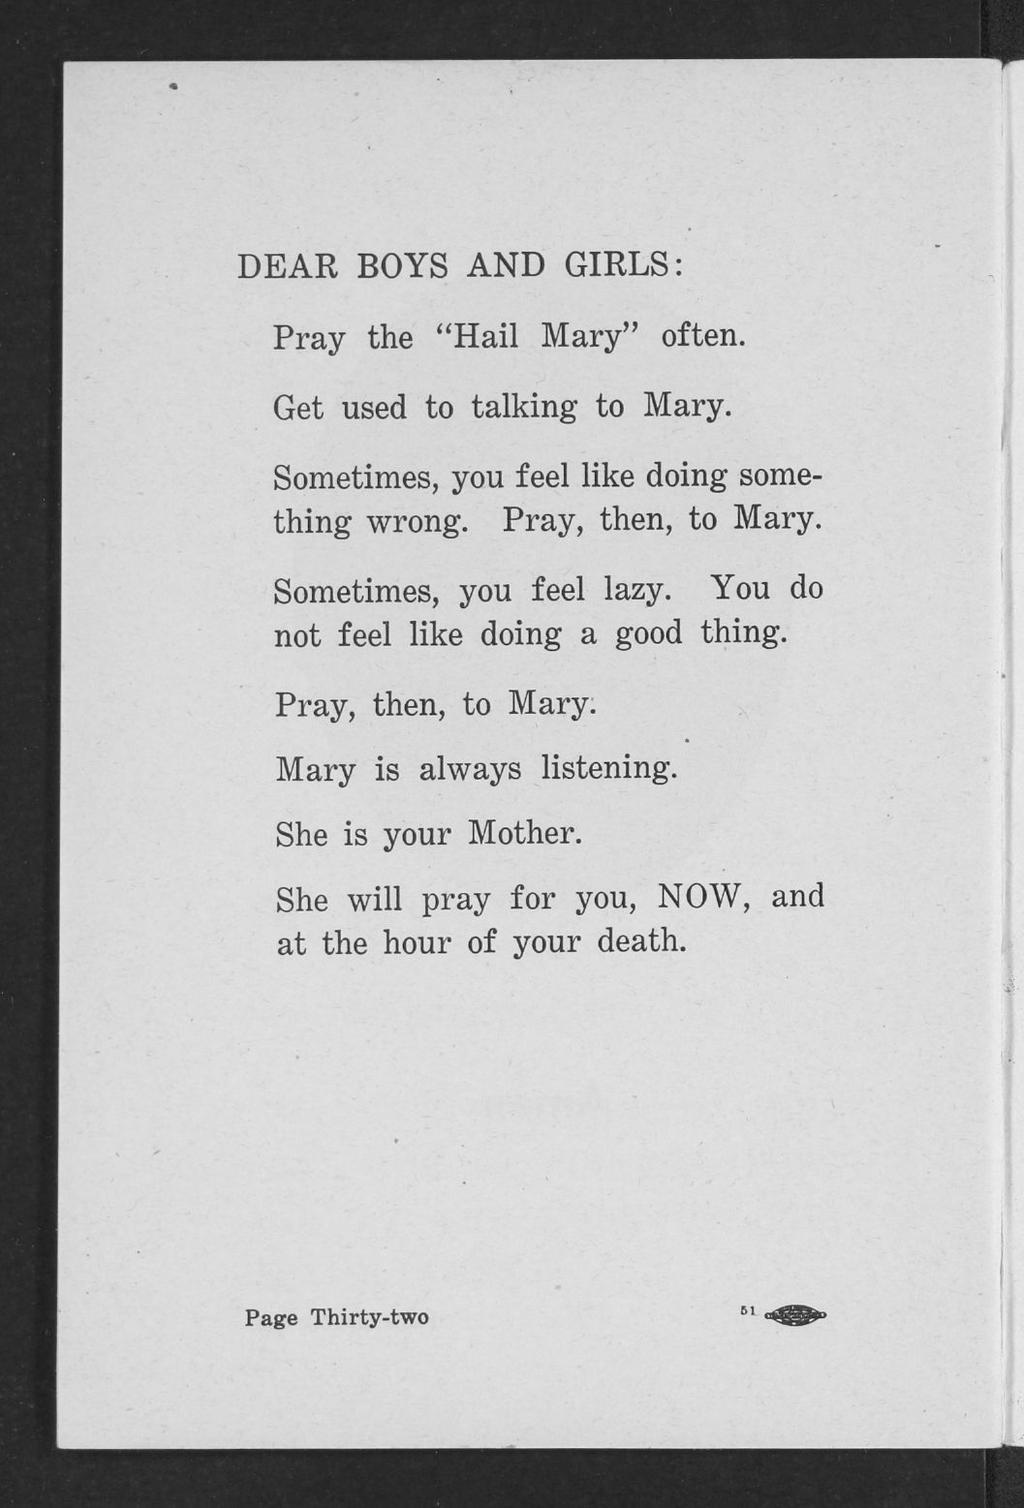 DEAR BOYS AND GIRLS: Pray the "Hail Mary" often. Get used to talking to Mary. Sometimes, you feel like doing something wrong. Pray, then, to Mary. Sometimes, you feel lazy.